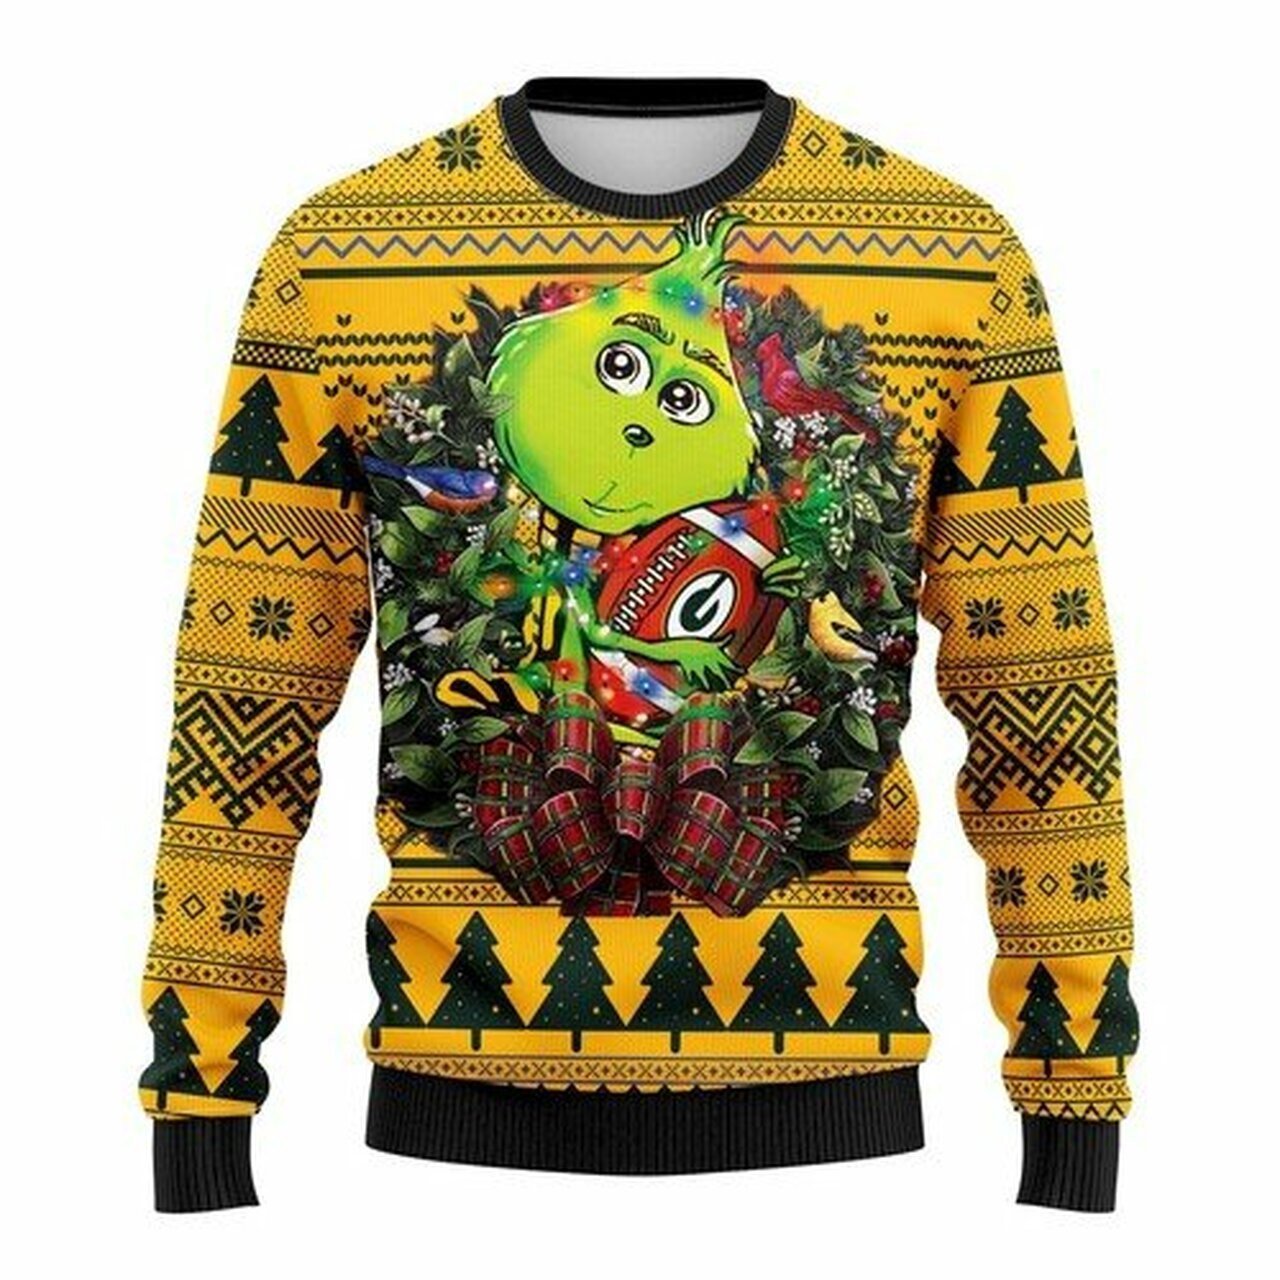 NFL Green Bay Packers Grinch hug ugly christmas sweater